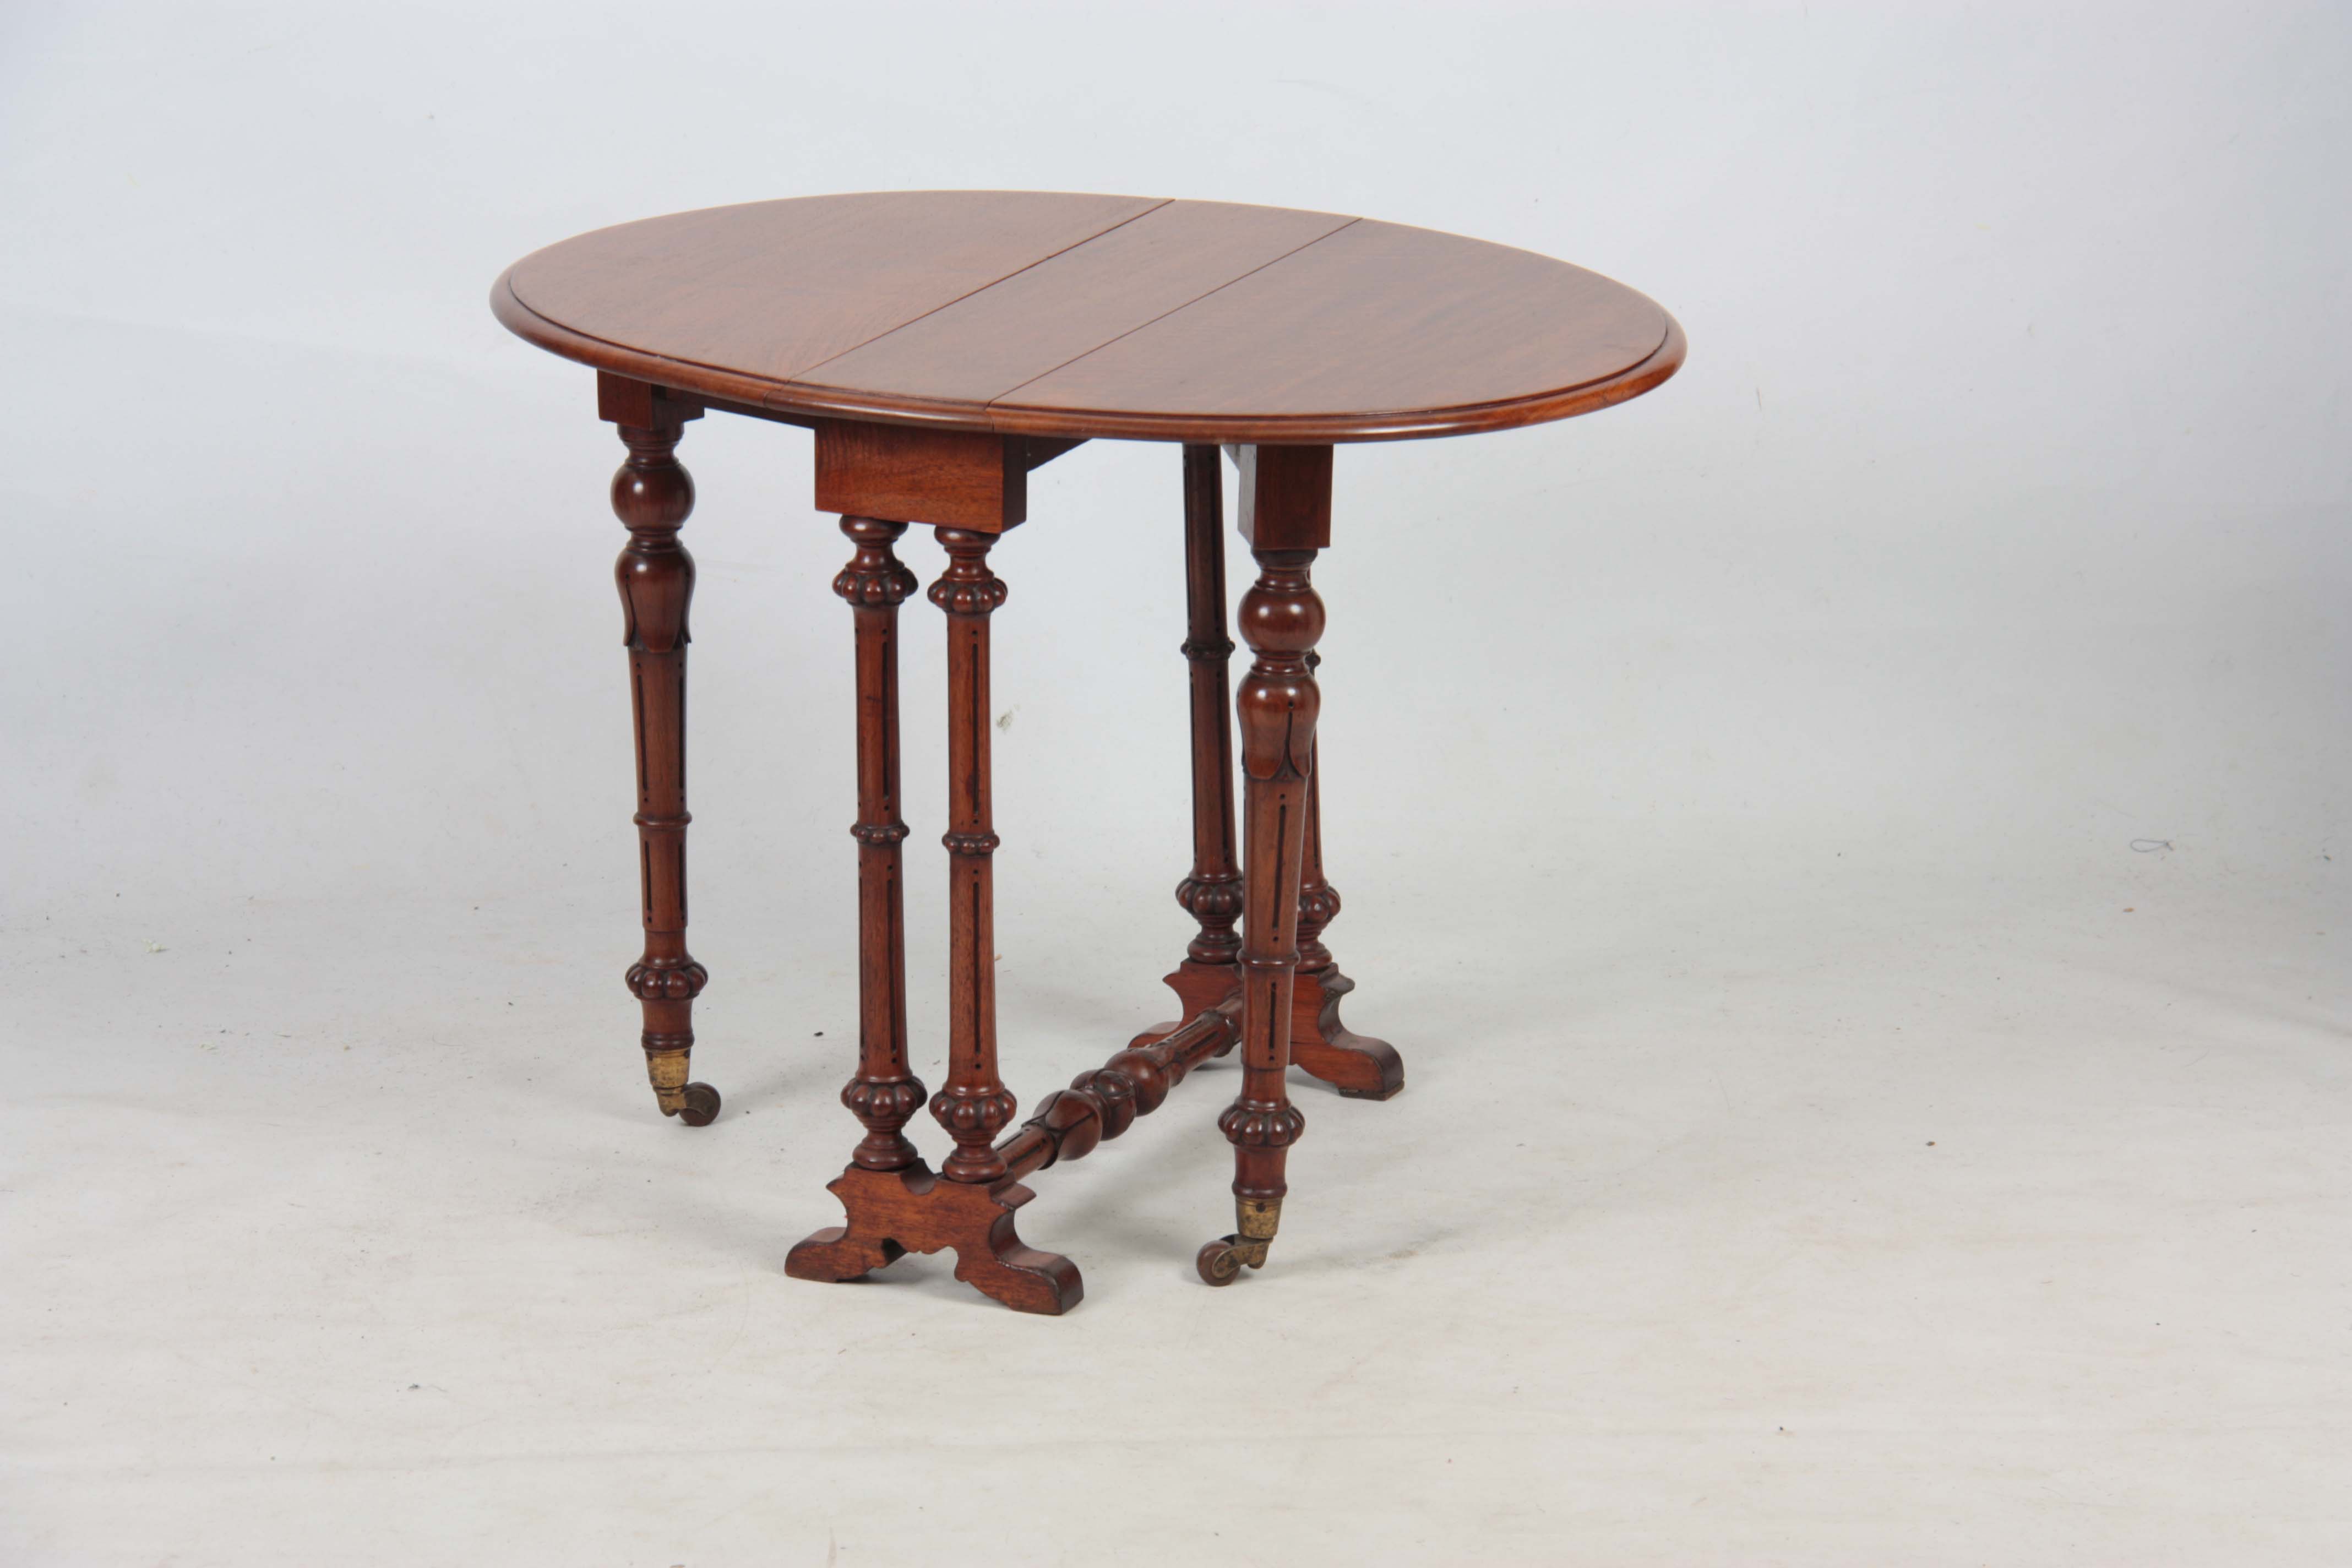 A 19TH CENTURY WALNUT MINIATURE SUTHERLAND TABLE with moulded edge oval top above a turned base with - Image 6 of 7